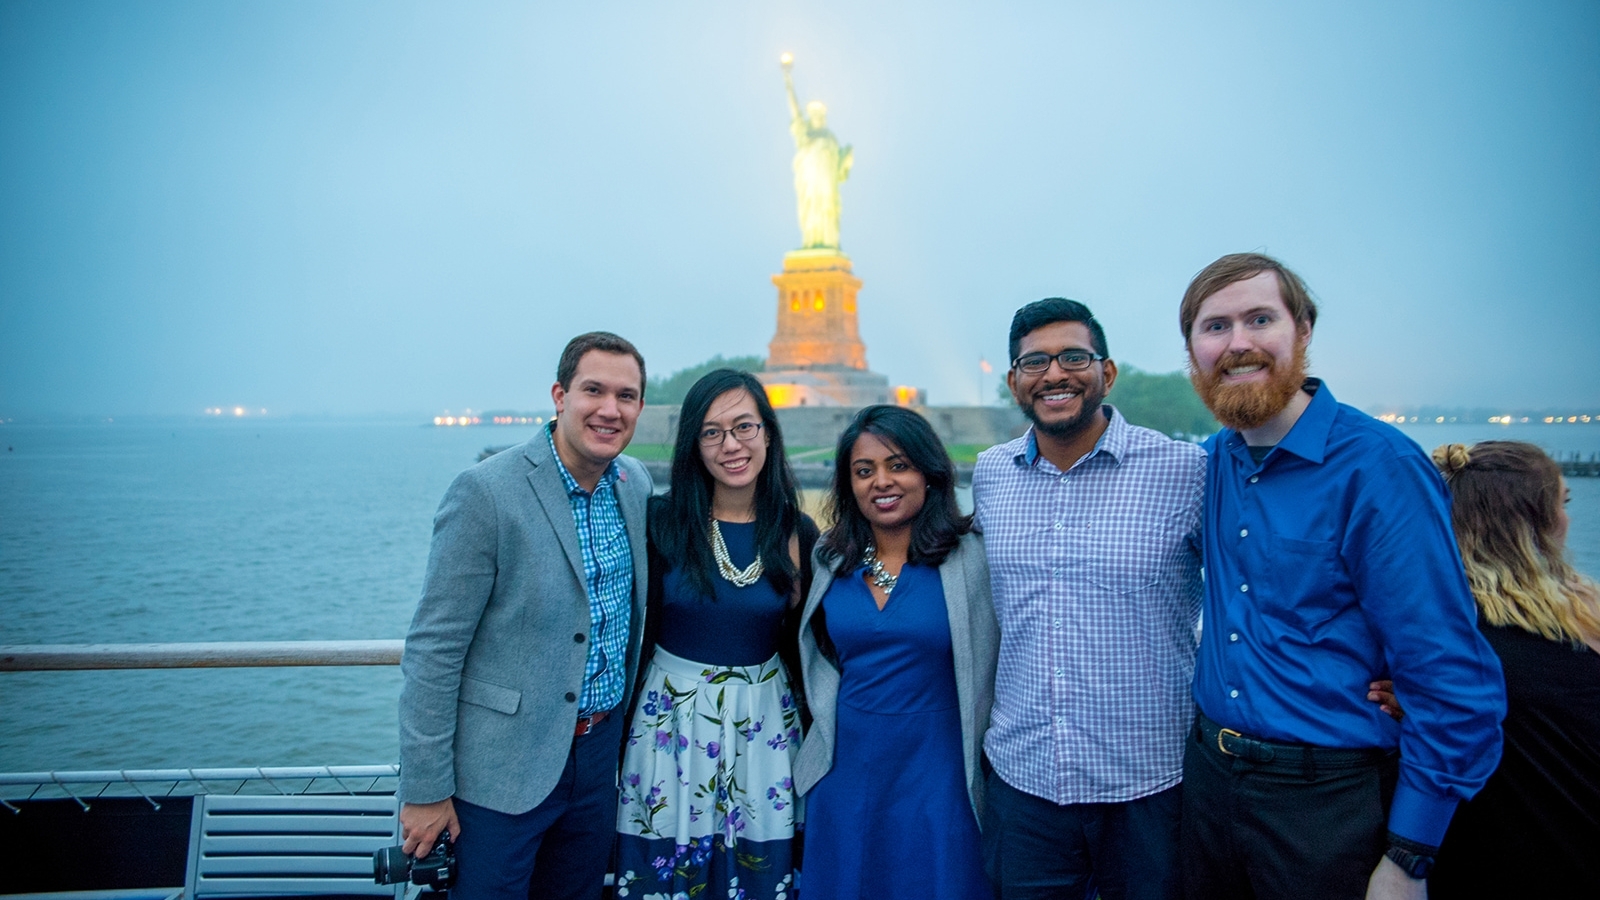 Group of Alumni on boat infront of statue of liberty